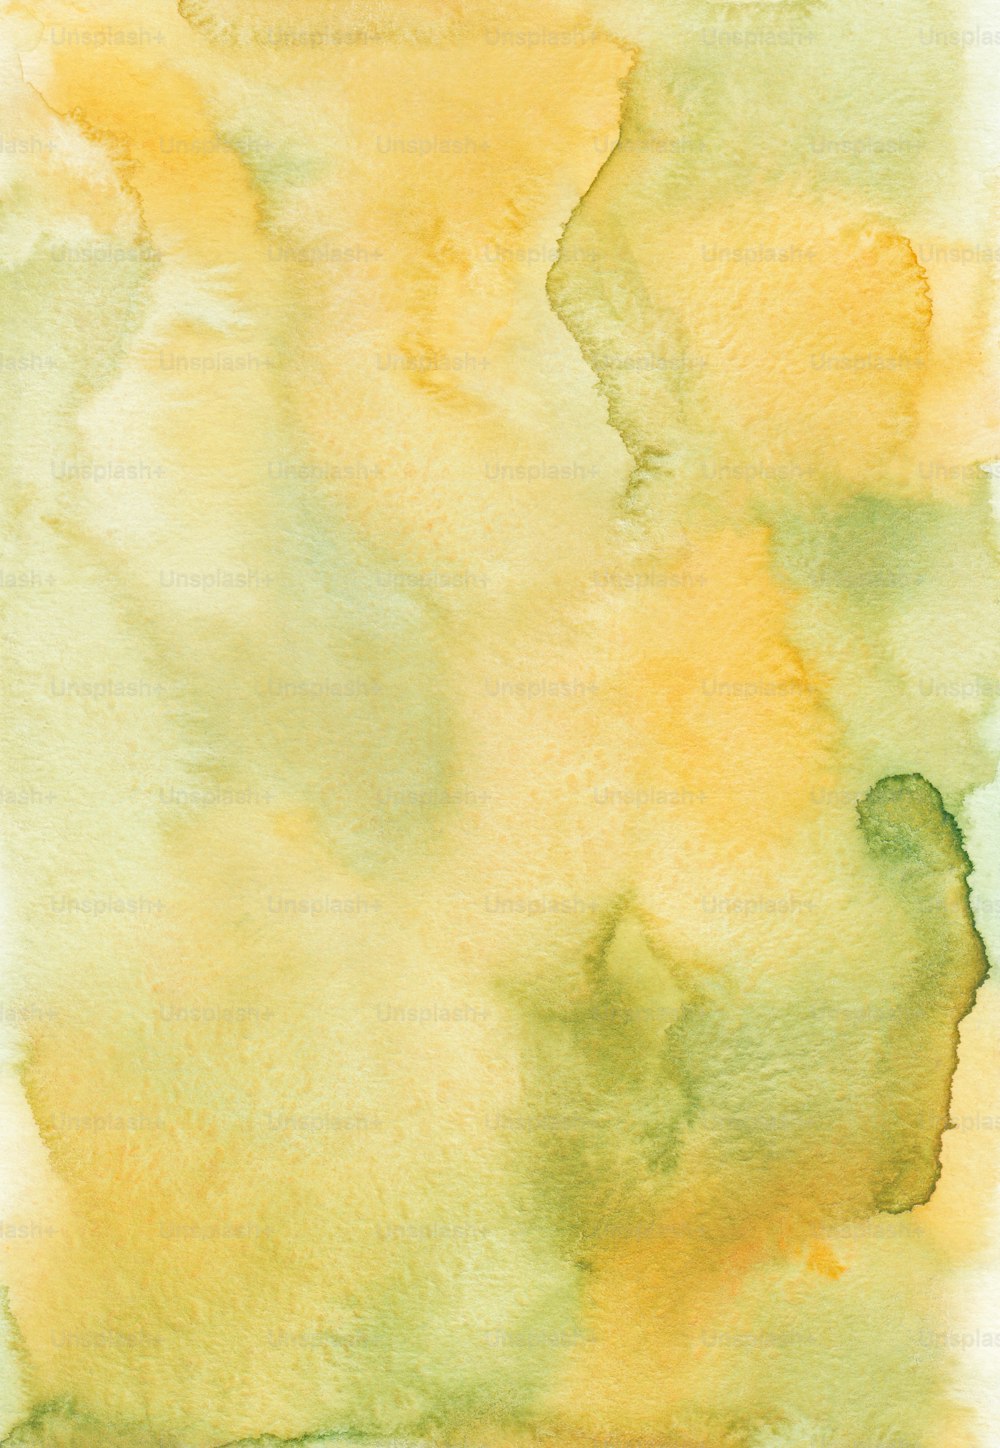 a watercolor painting of yellow and green colors